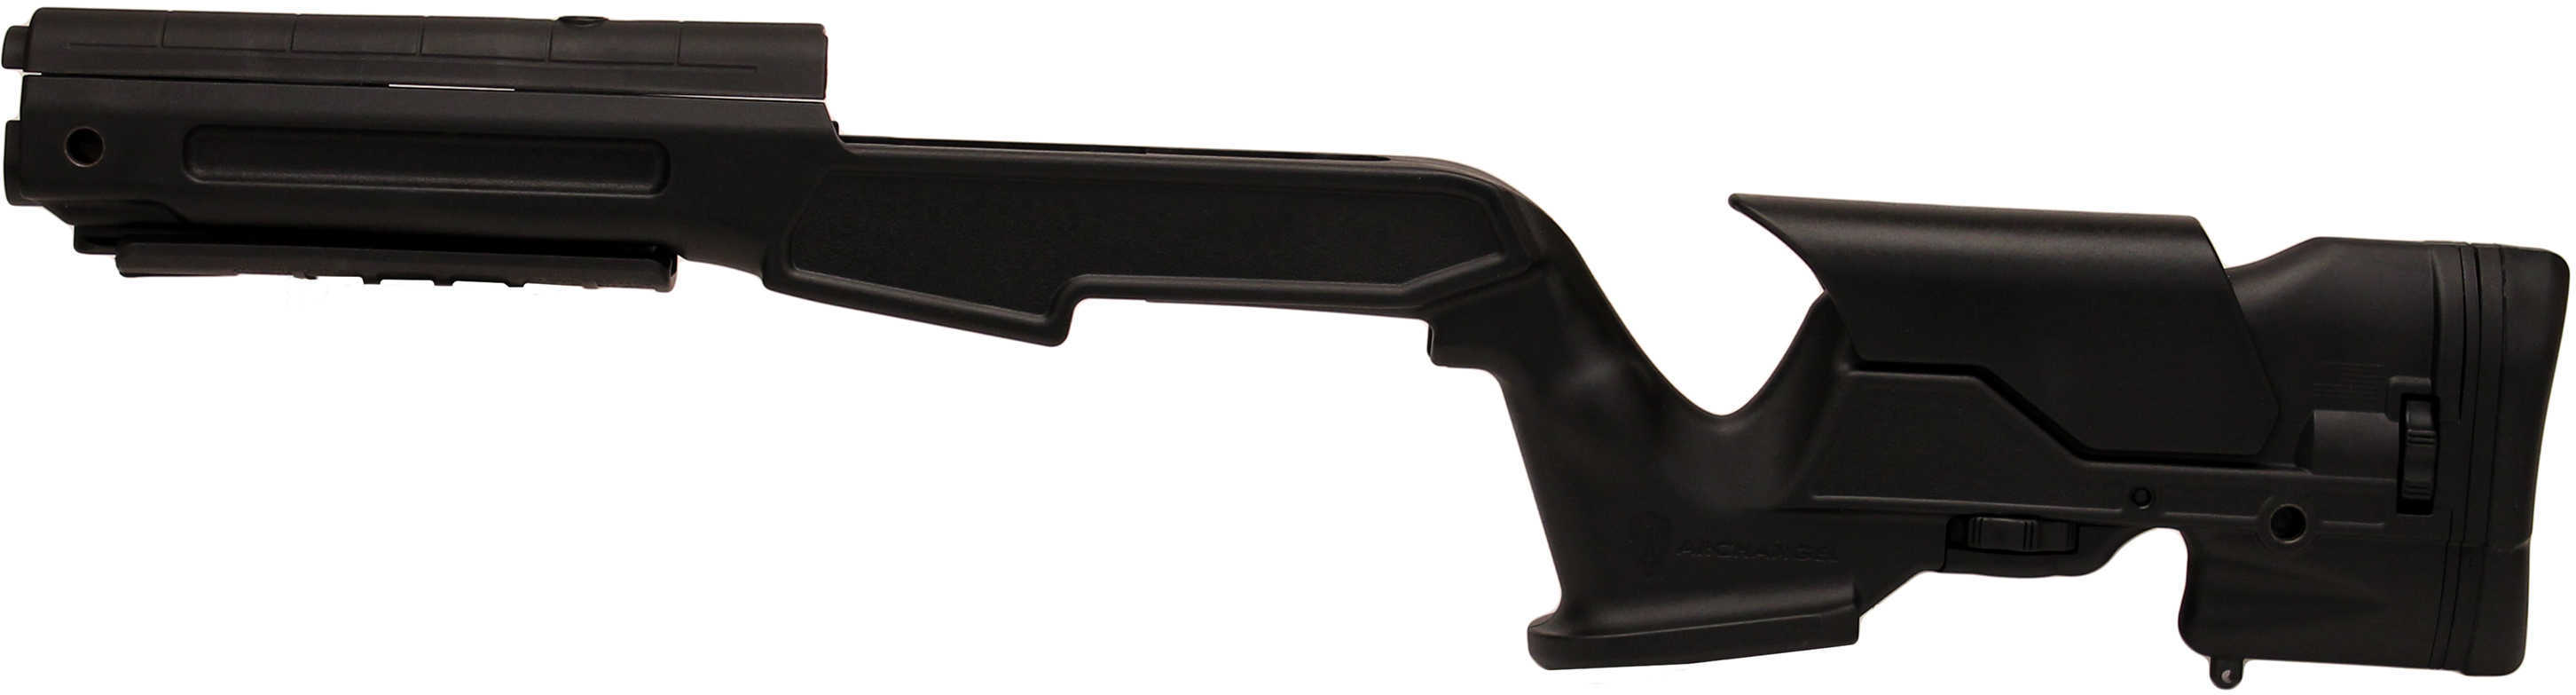 Promag Archangel Precision Rifle Stock For The Ruger Mini 14/30 - Black Polymer